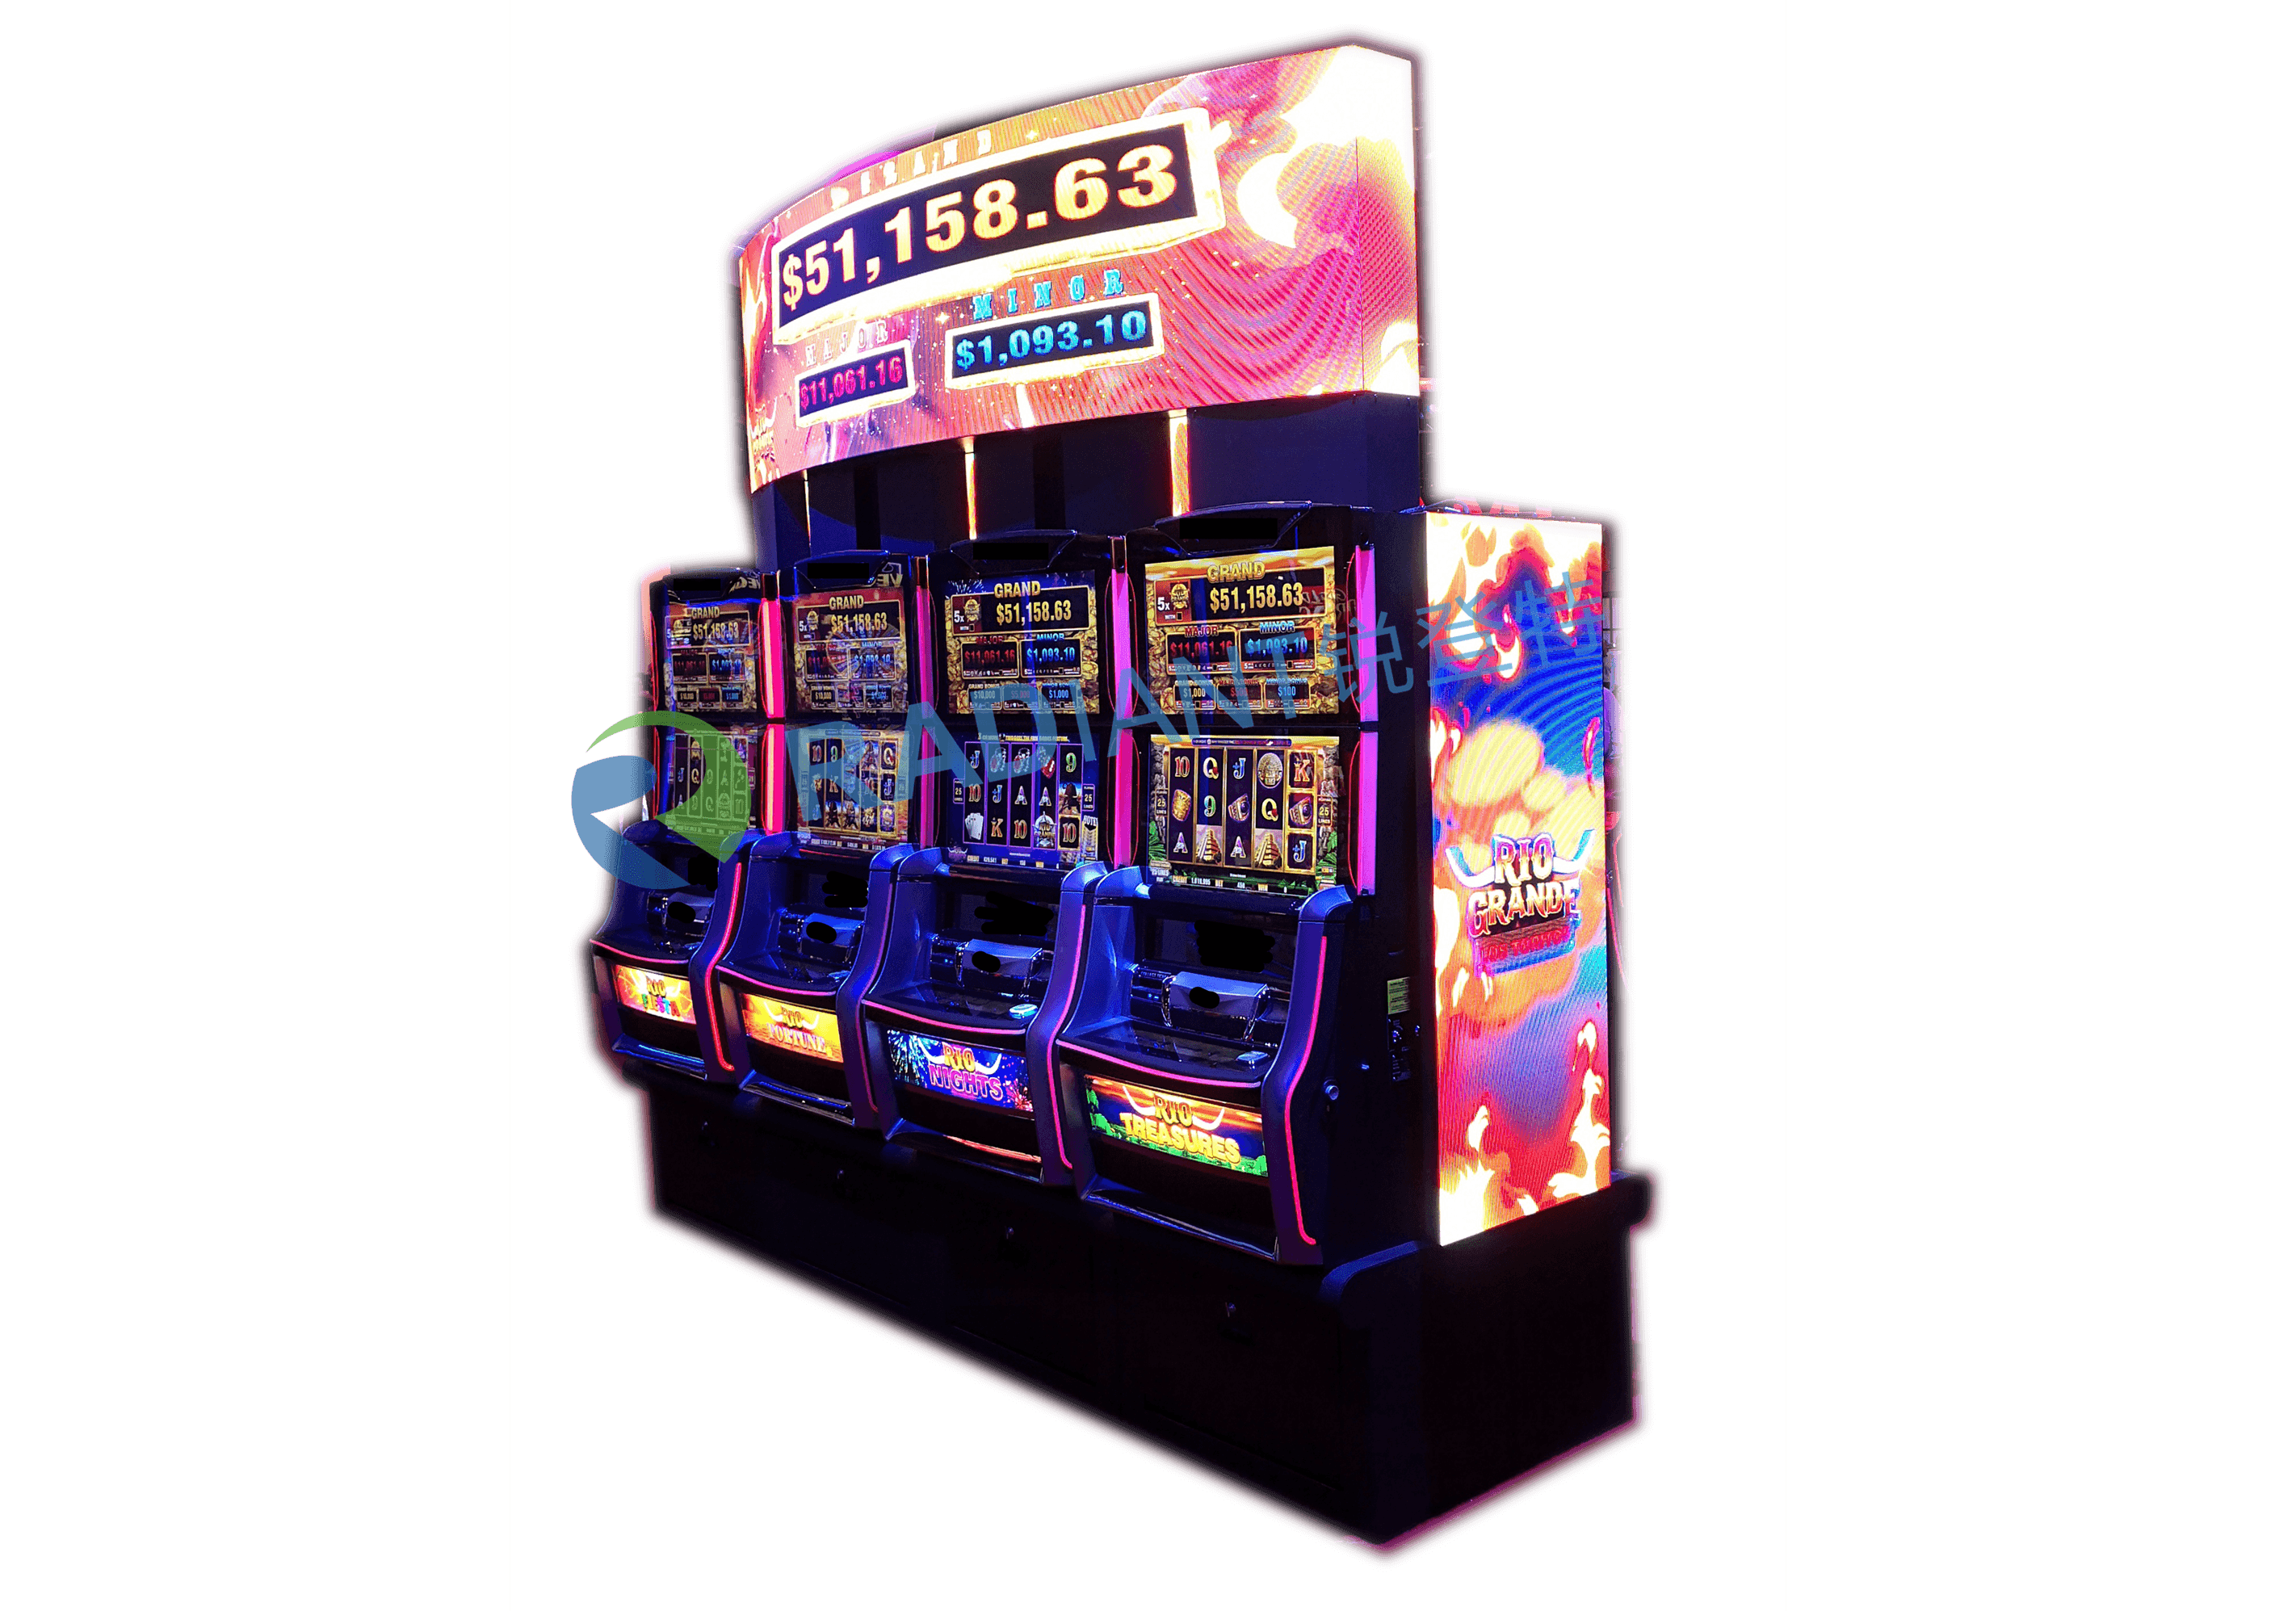 Ellipse LED Display for Slot Machine Featured Image